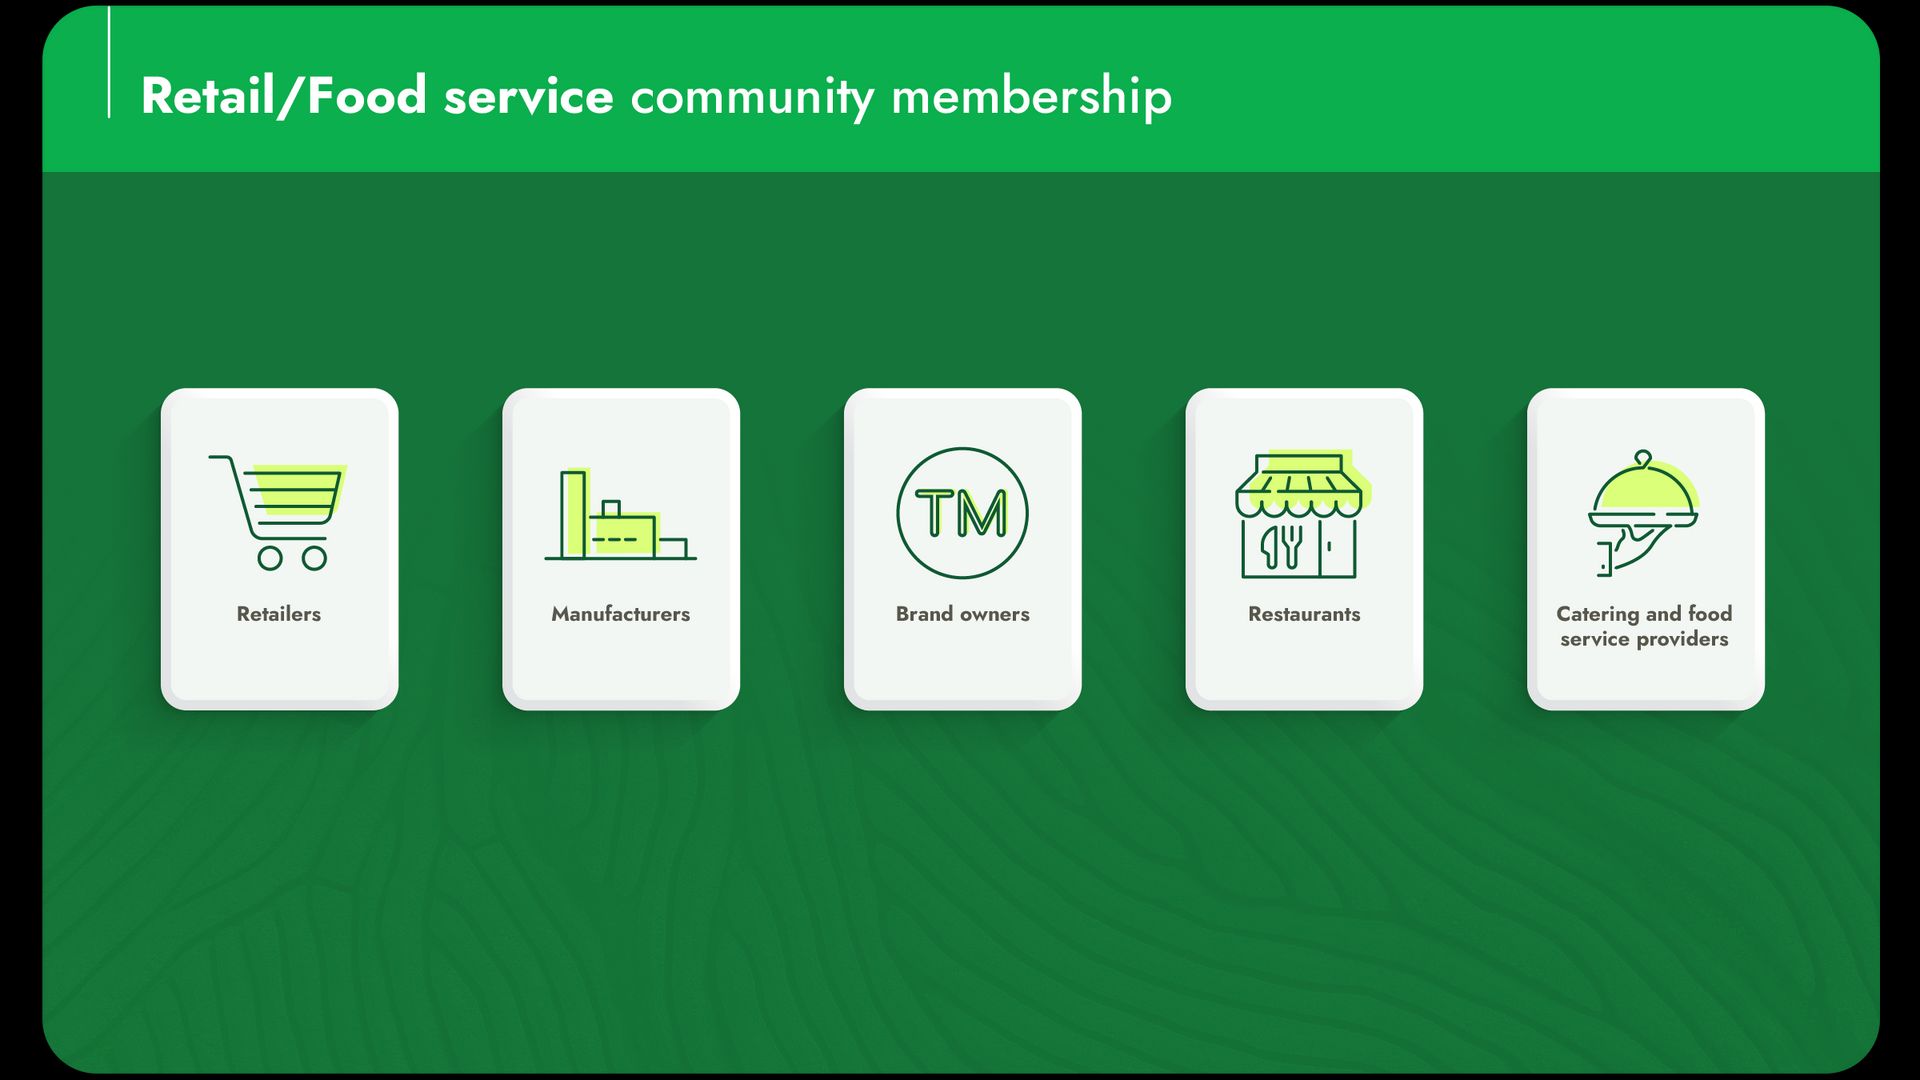 Retail/Food service community membership is for retailers, manufacturers, brand owners, restaurants and catering and food service providers.